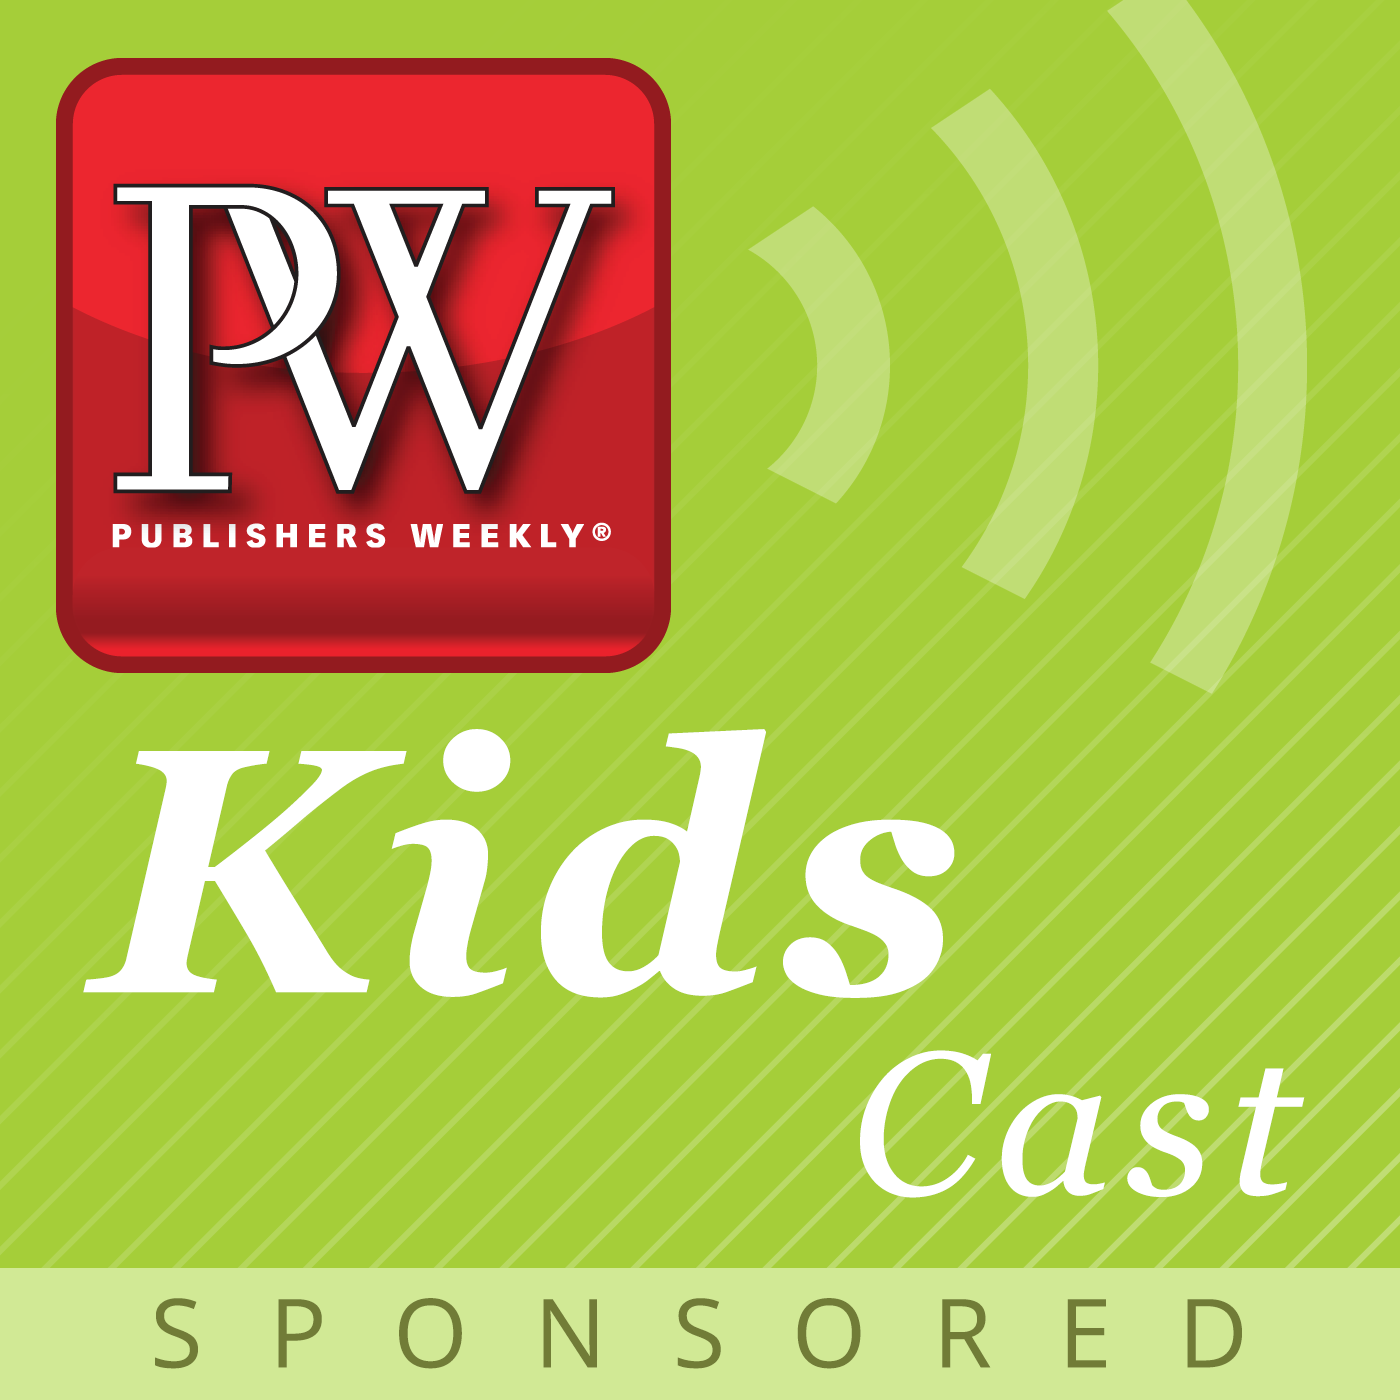 PW KidsCast: A Conversation with Kwame Alexander and Mary Rand Hess